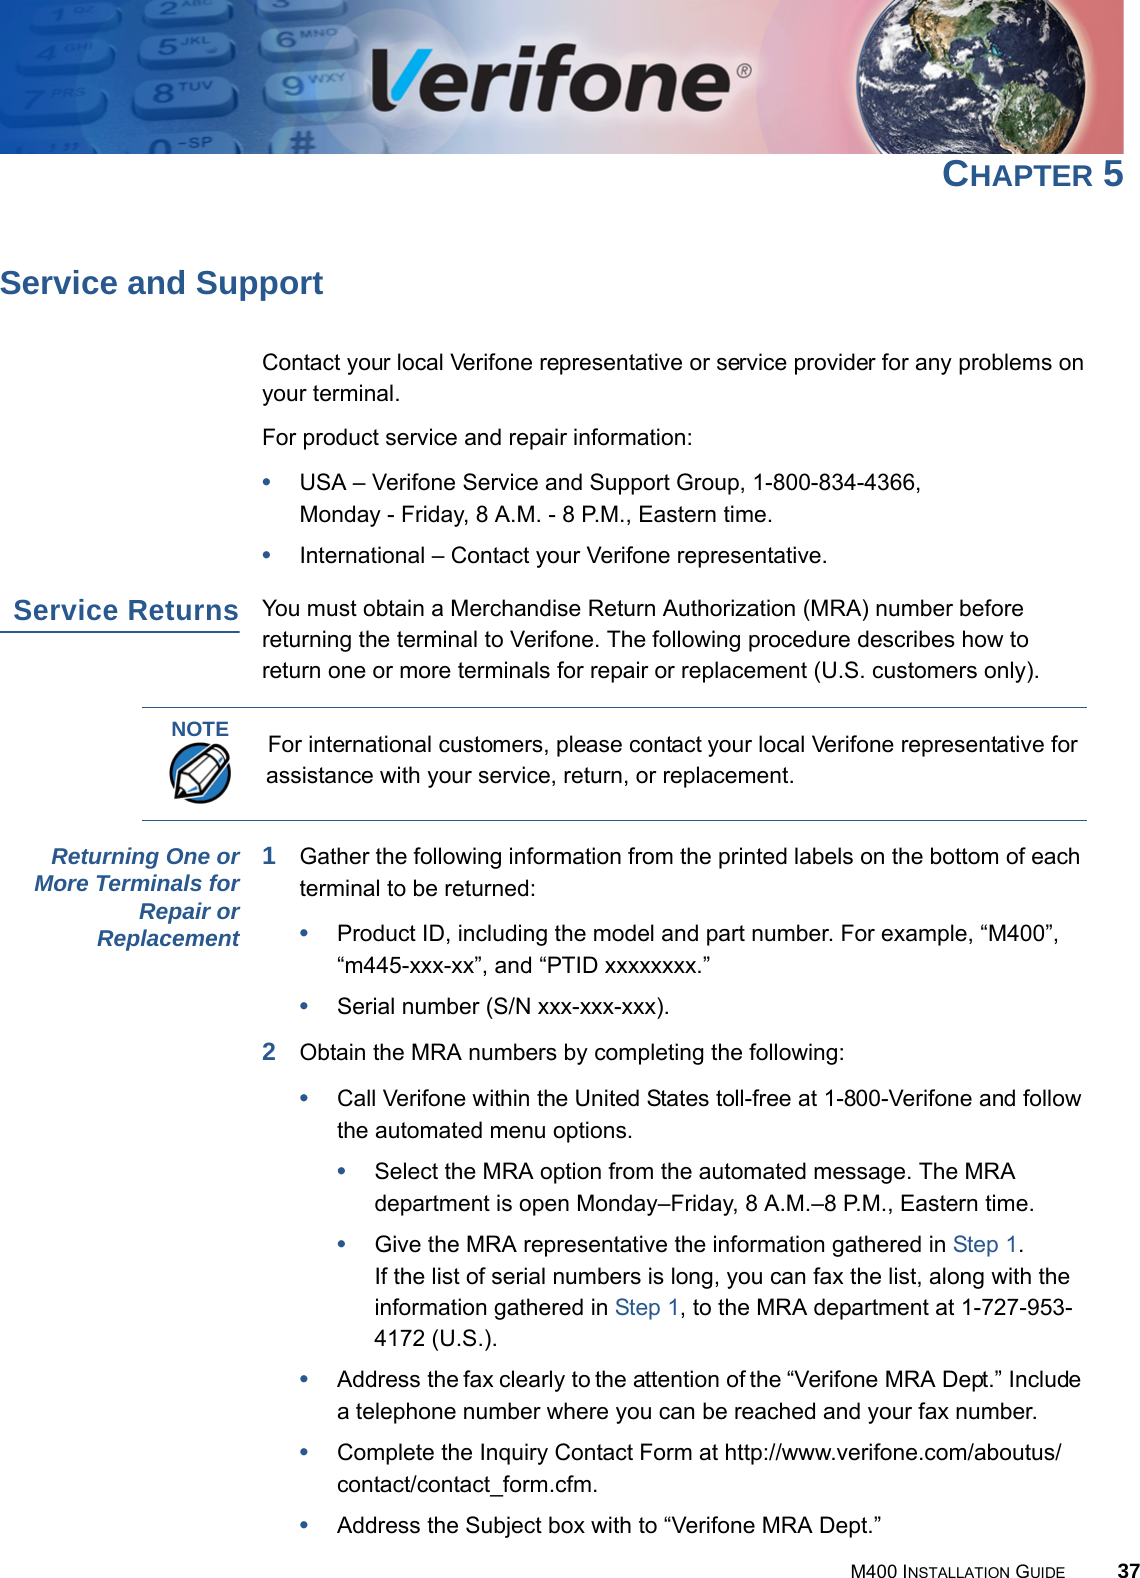 M400 INSTALLATION GUIDE 37CHAPTER 5Service and SupportContact your local Verifone representative or service provider for any problems on your terminal.For product service and repair information:•USA – Verifone Service and Support Group, 1-800-834-4366, Monday - Friday, 8 A.M. - 8 P.M., Eastern time.•International – Contact your Verifone representative.Service ReturnsYou must obtain a Merchandise Return Authorization (MRA) number before returning the terminal to Verifone. The following procedure describes how to return one or more terminals for repair or replacement (U.S. customers only).Returning One orMore Terminals forRepair orReplacement1Gather the following information from the printed labels on the bottom of each terminal to be returned:•Product ID, including the model and part number. For example, “M400”, “m445-xxx-xx”, and “PTID xxxxxxxx.”•Serial number (S/N xxx-xxx-xxx).2Obtain the MRA numbers by completing the following:•Call Verifone within the United States toll-free at 1-800-Verifone and follow the automated menu options.•Select the MRA option from the automated message. The MRA department is open Monday–Friday, 8 A.M.–8 P.M., Eastern time.•Give the MRA representative the information gathered in Step 1.If the list of serial numbers is long, you can fax the list, along with the information gathered in Step 1, to the MRA department at 1-727-953-4172 (U.S.).•Address the fax clearly to the attention of the “Verifone MRA Dept.” Include a telephone number where you can be reached and your fax number.•Complete the Inquiry Contact Form at http://www.verifone.com/aboutus/contact/contact_form.cfm.•Address the Subject box with to “Verifone MRA Dept.”NOTEFor international customers, please contact your local Verifone representative for assistance with your service, return, or replacement.